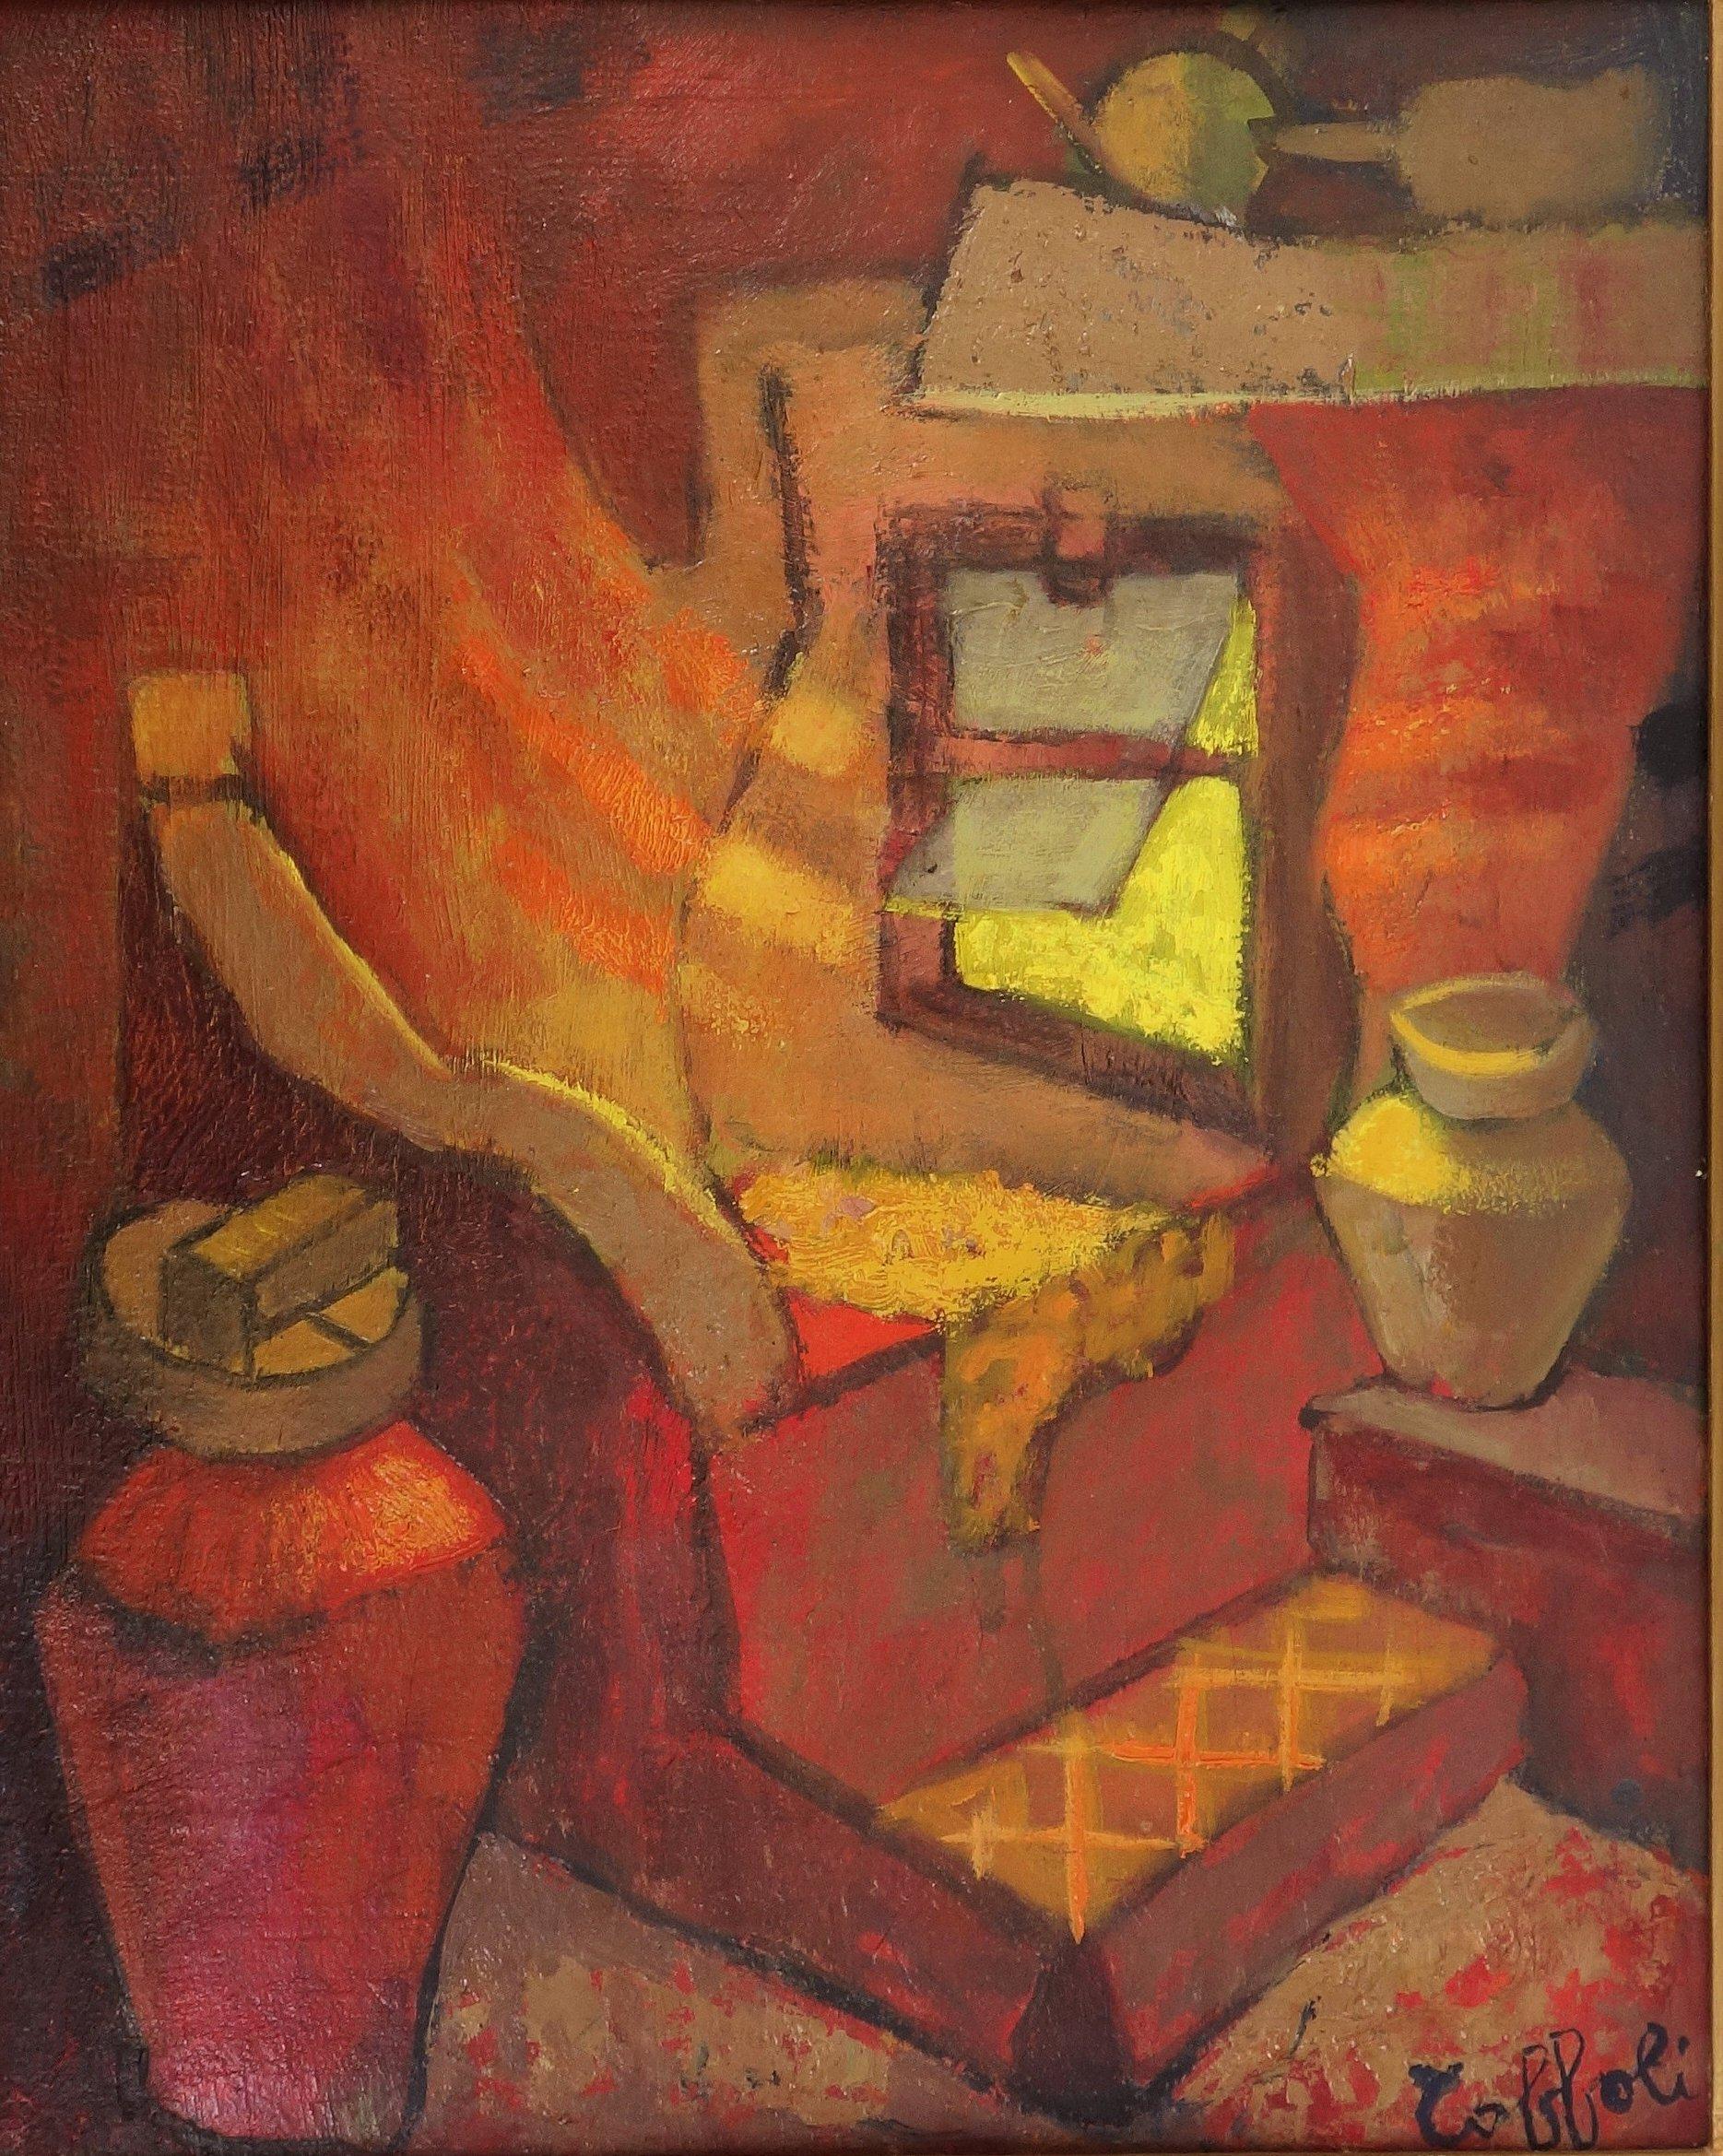 Louis Toffoli (1907-1999)
Small Orange Room in Italy

Original oil painting on panel
Signed bottom right
On canvas 41 x 31 cm (c. 16 x 12 inch)
Presented in a golden wood frame 62 x 54 cm (c. 25 x 22 inch) 

Excellent condition, light uses to the